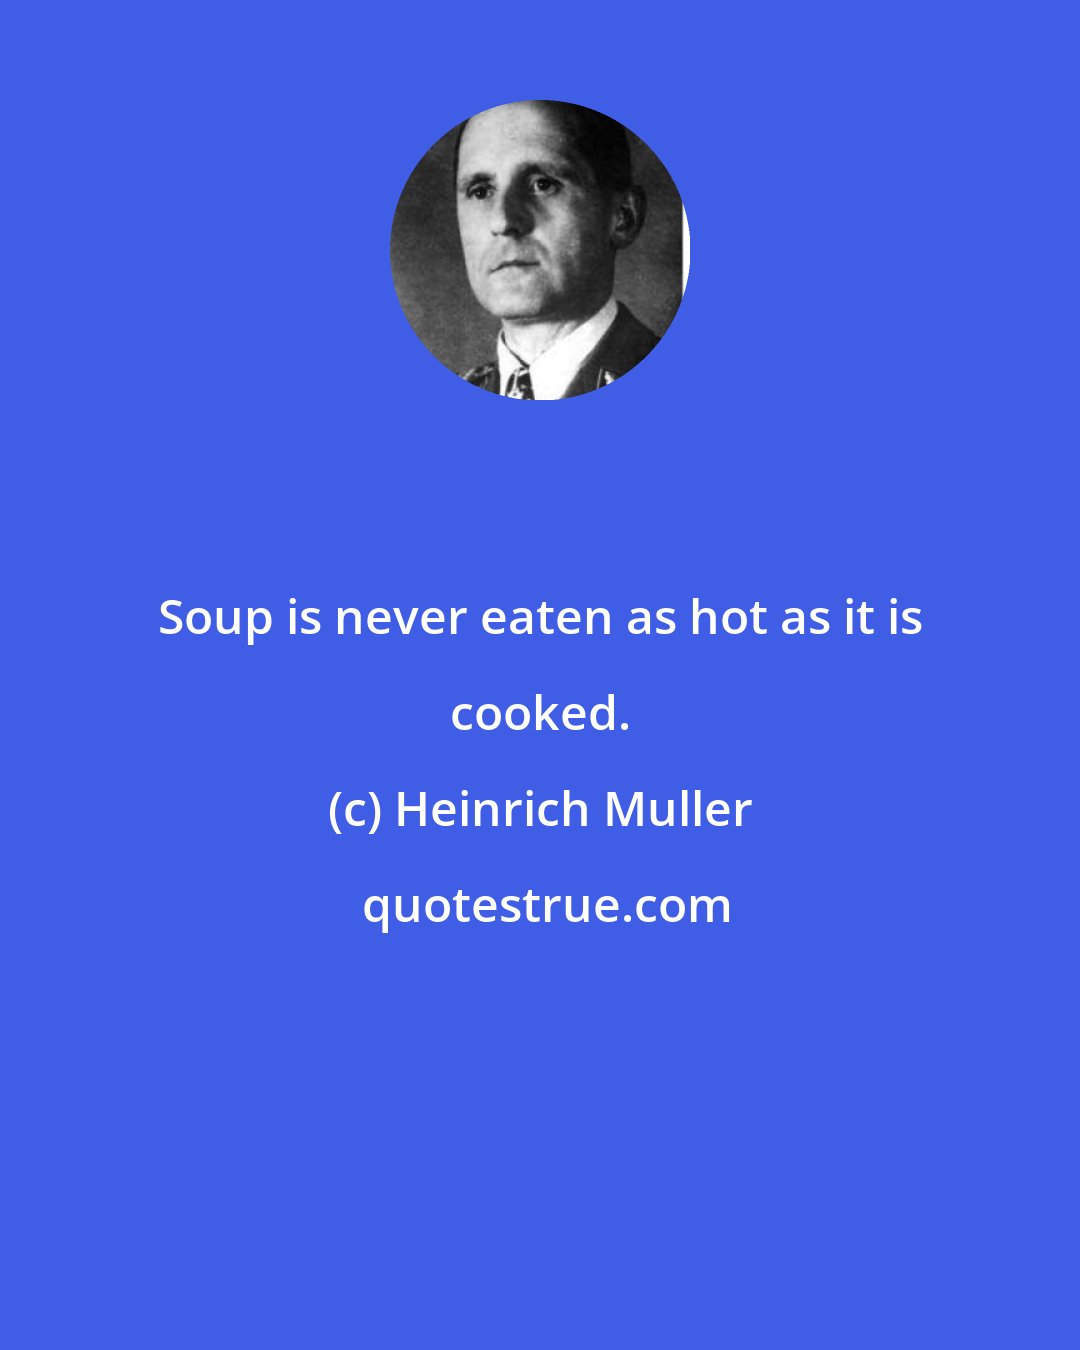 Heinrich Muller: Soup is never eaten as hot as it is cooked.